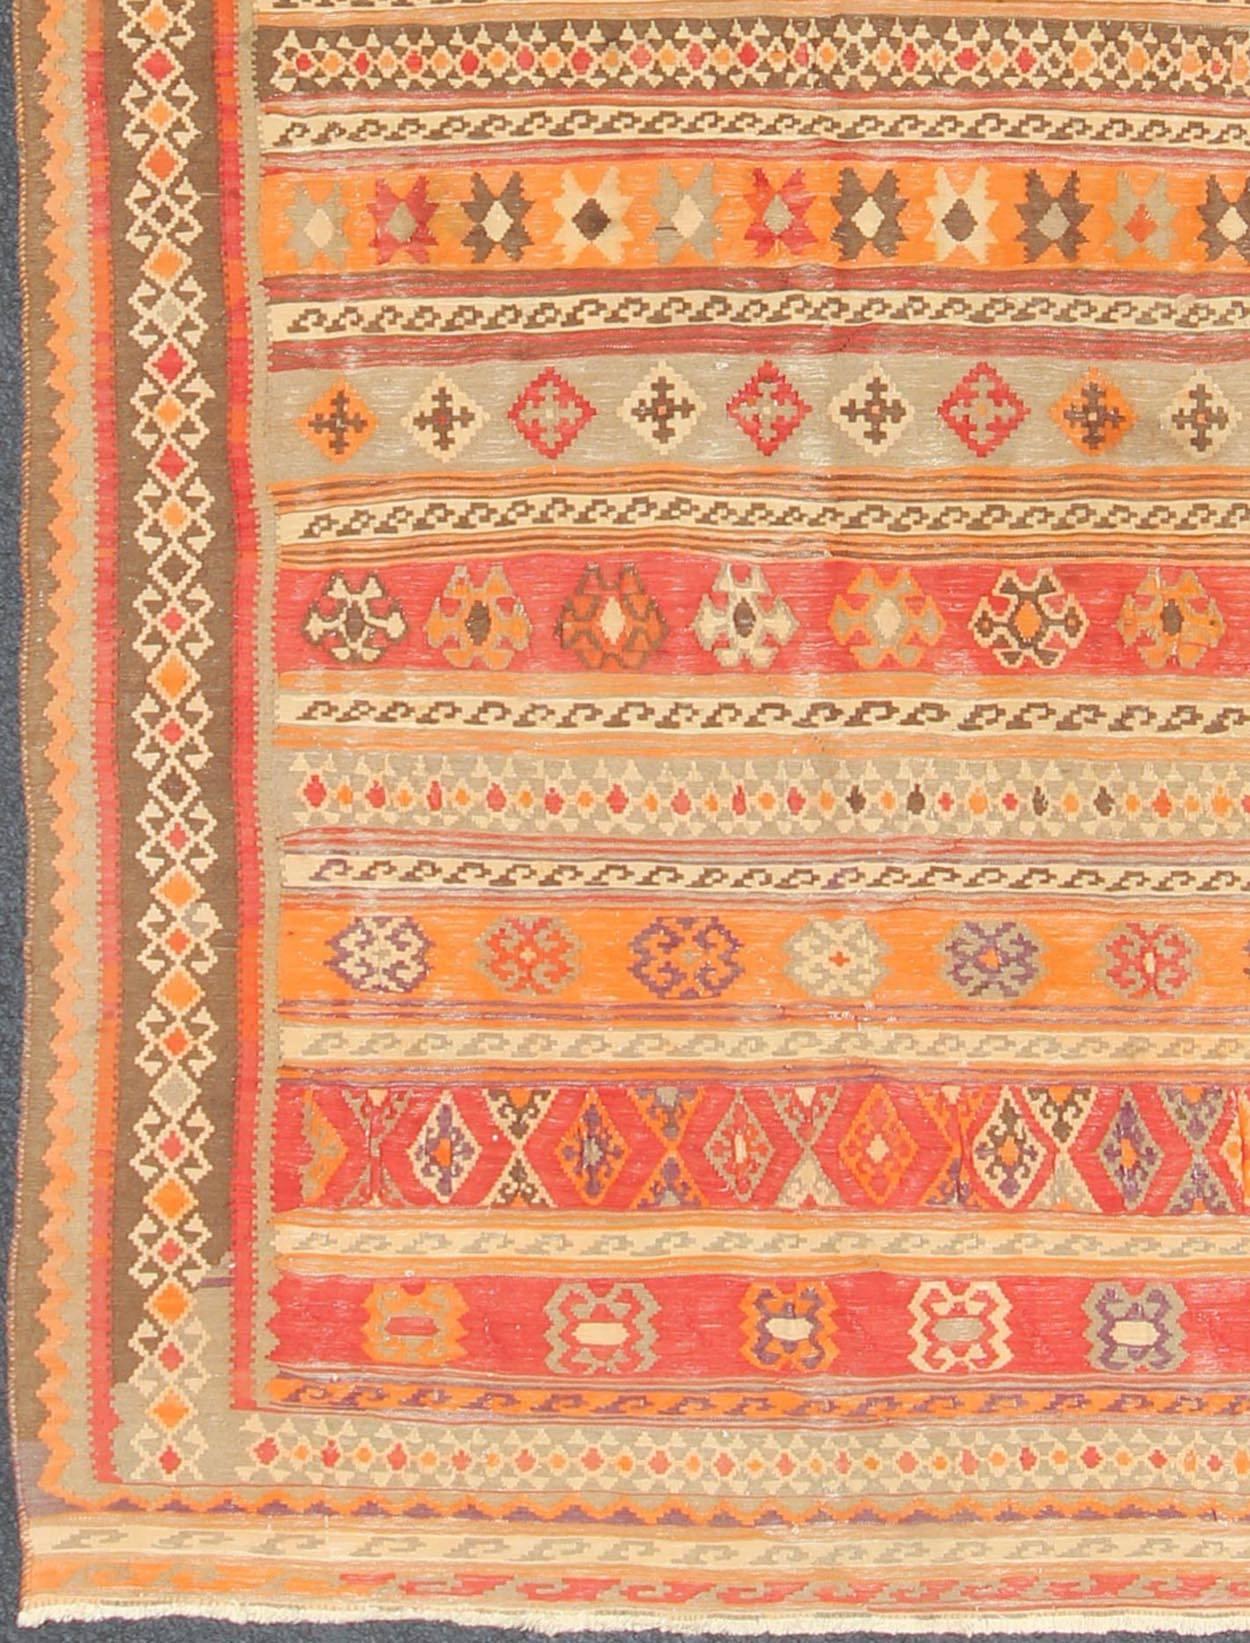 Antique Moroccan Kilim with Embroidery in Red, Orange, Gray and Brown, S12-0601, 1930's Antique Moroccan Kilim Rug . 
This brilliant kilim displays faded orange-red, yellow, red, brown and gray stripes. The embroideries and details include panels of